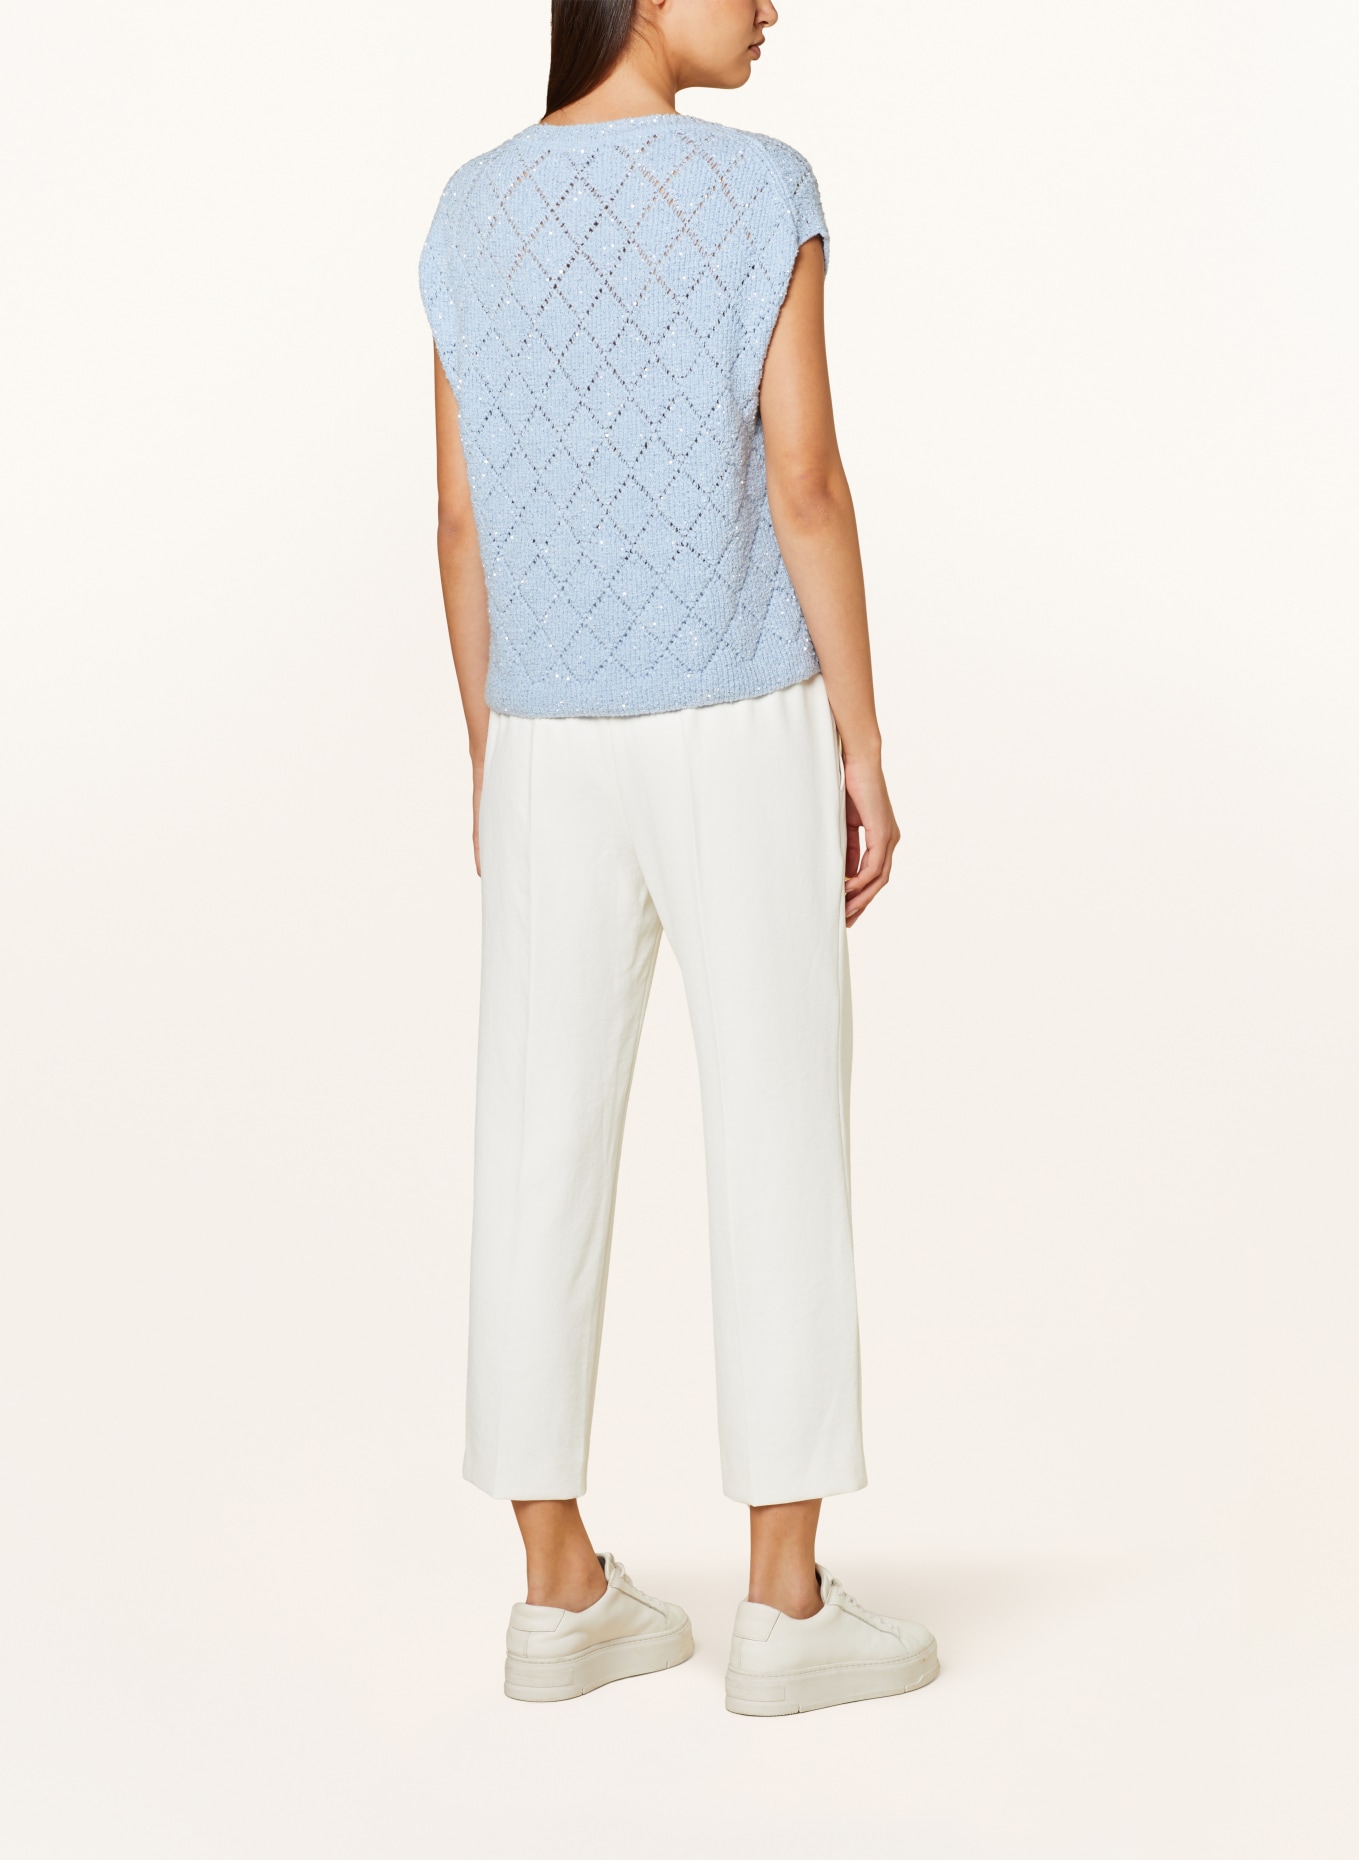 MARC CAIN Sweater vest with sequins, Color: 320 soft summer sky (Image 3)